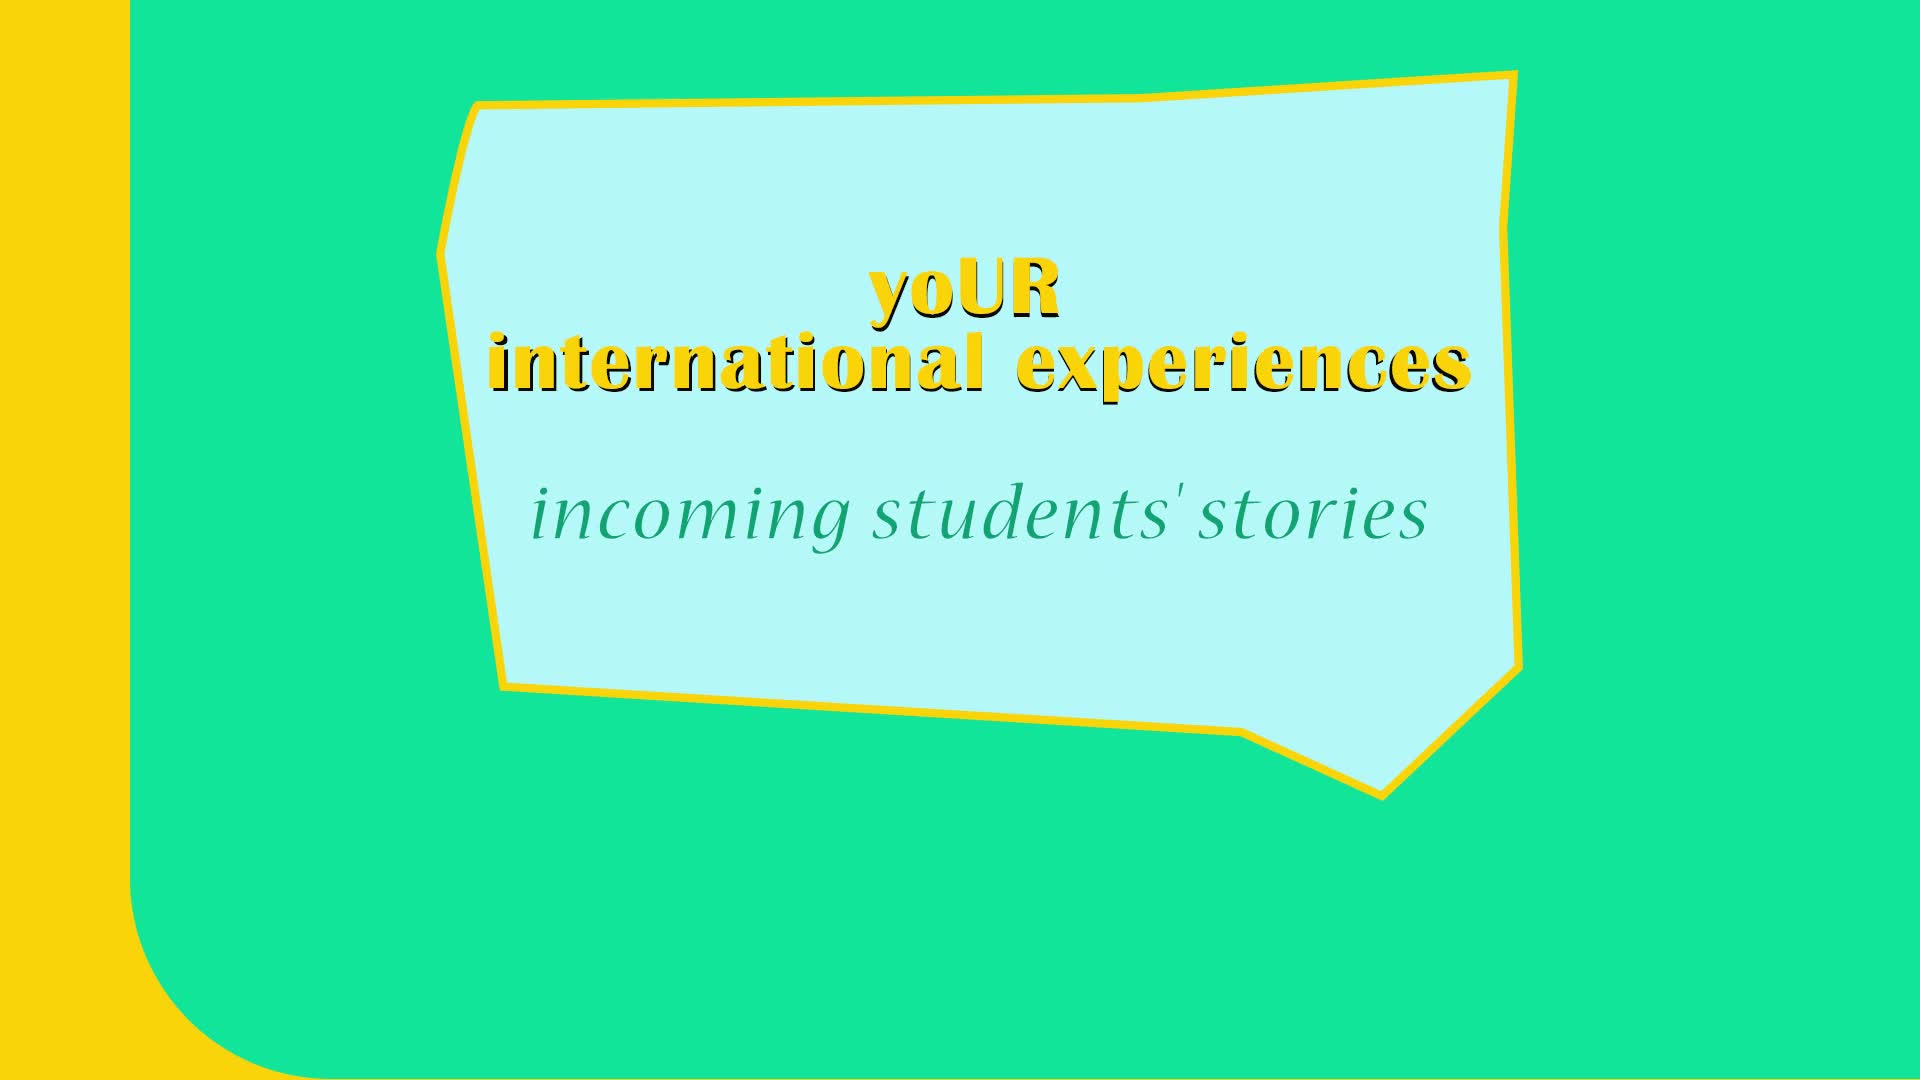 Interview with incoming students - Susy from Taiwan